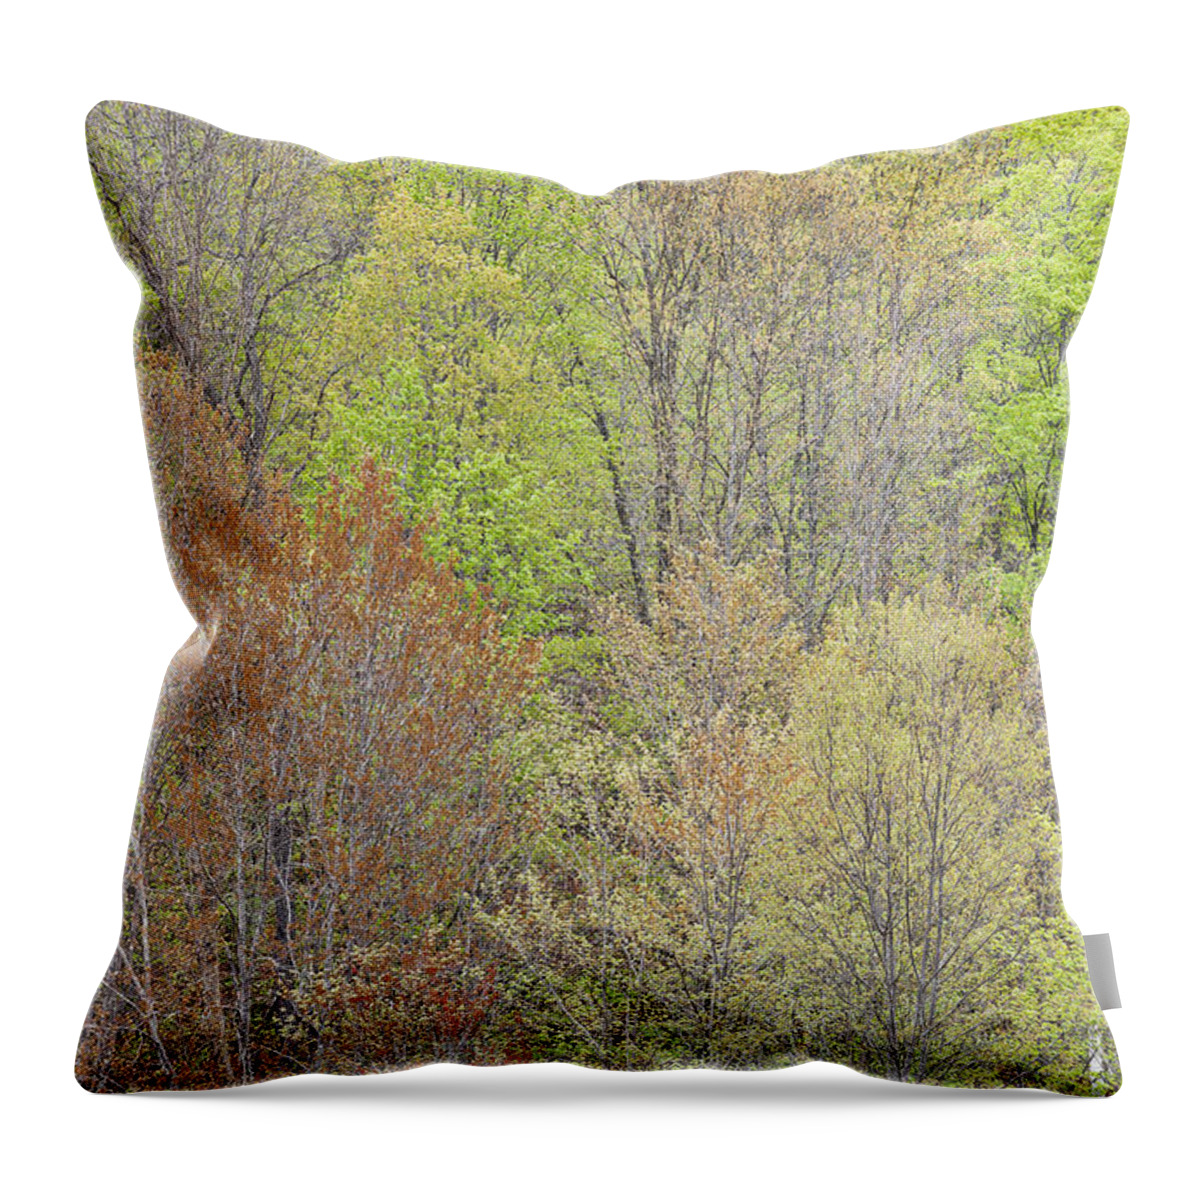 Spring Throw Pillow featuring the photograph Spring Hillside Foliage by Alan L Graham